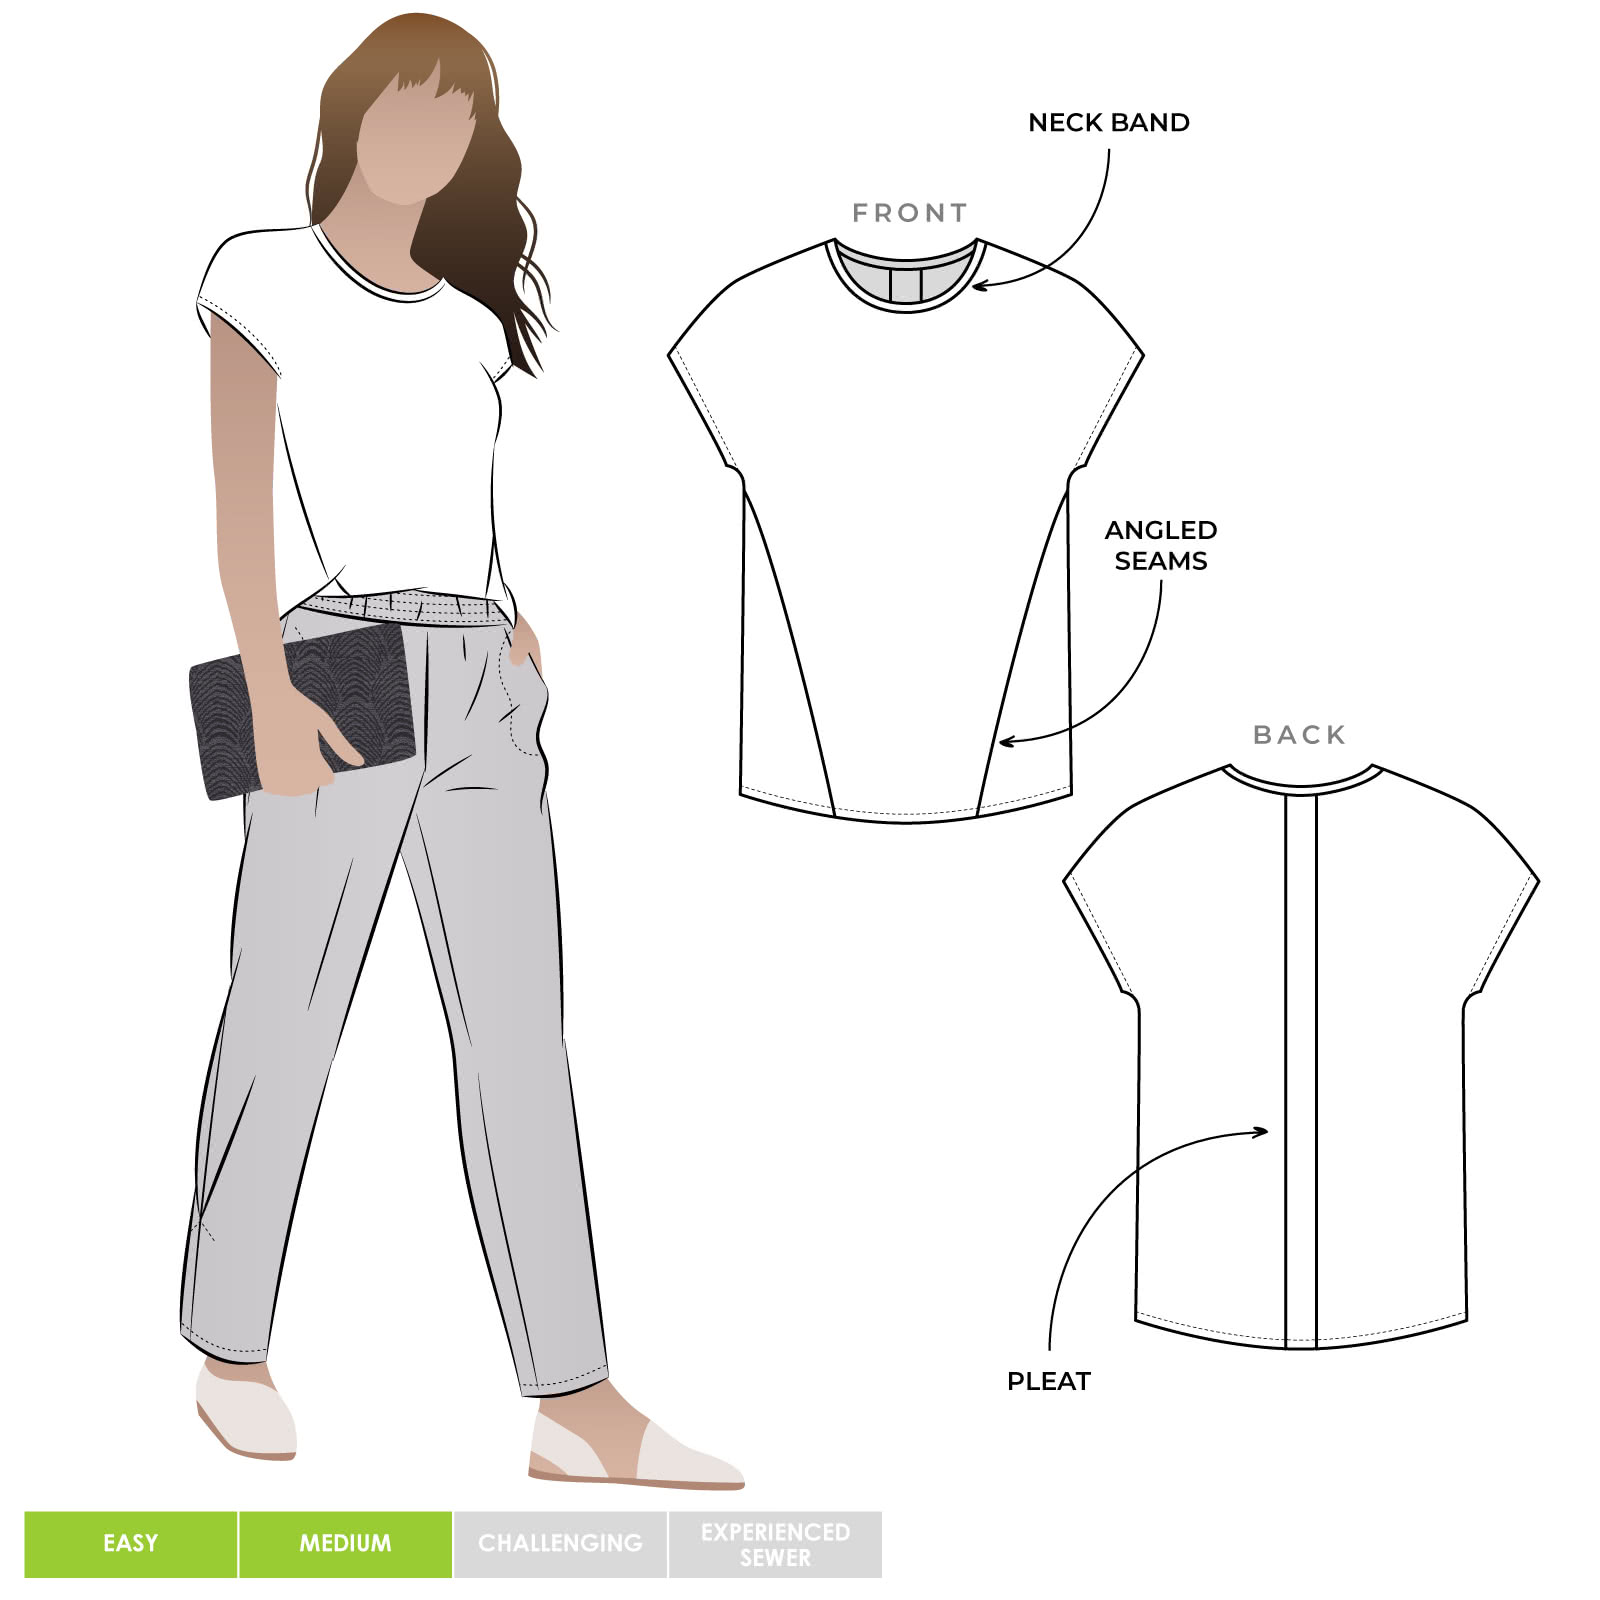 Besharl Knit Tee Sewing Pattern By Style Arc - Square cut extended shoulder T-shirt with angled seams & back detail.